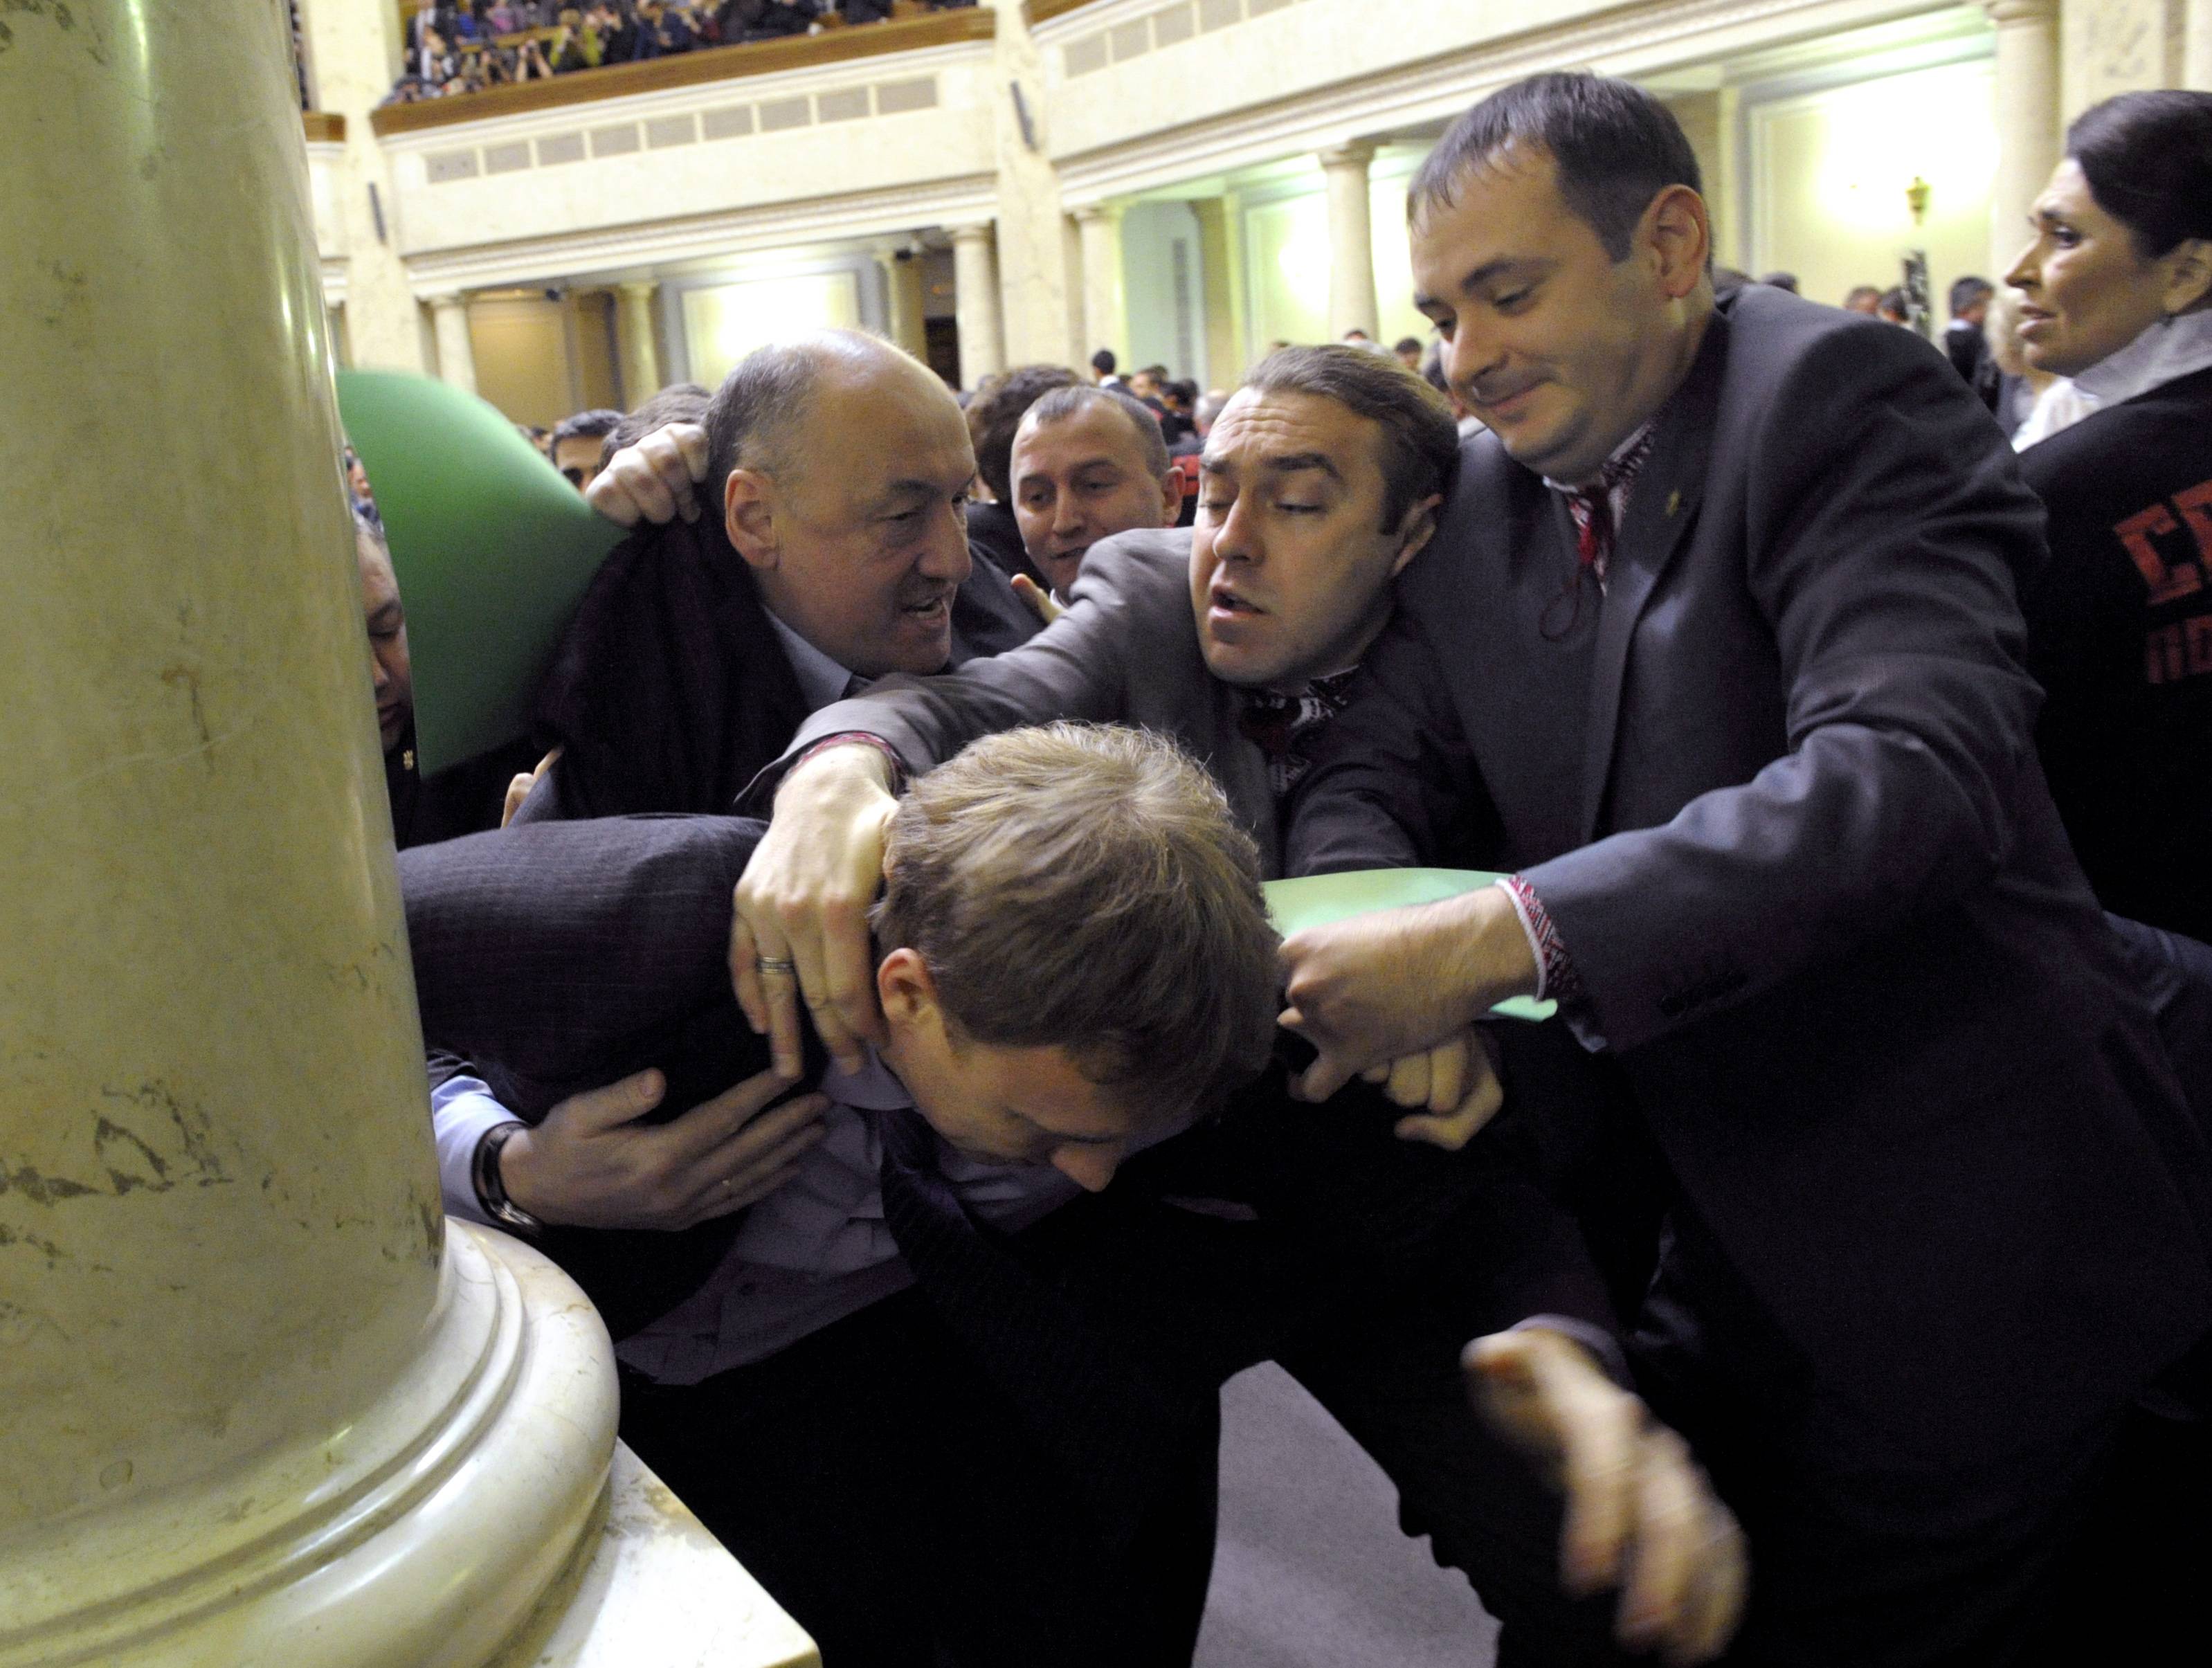 Parliament Fight Club: When Lawmakers Attack